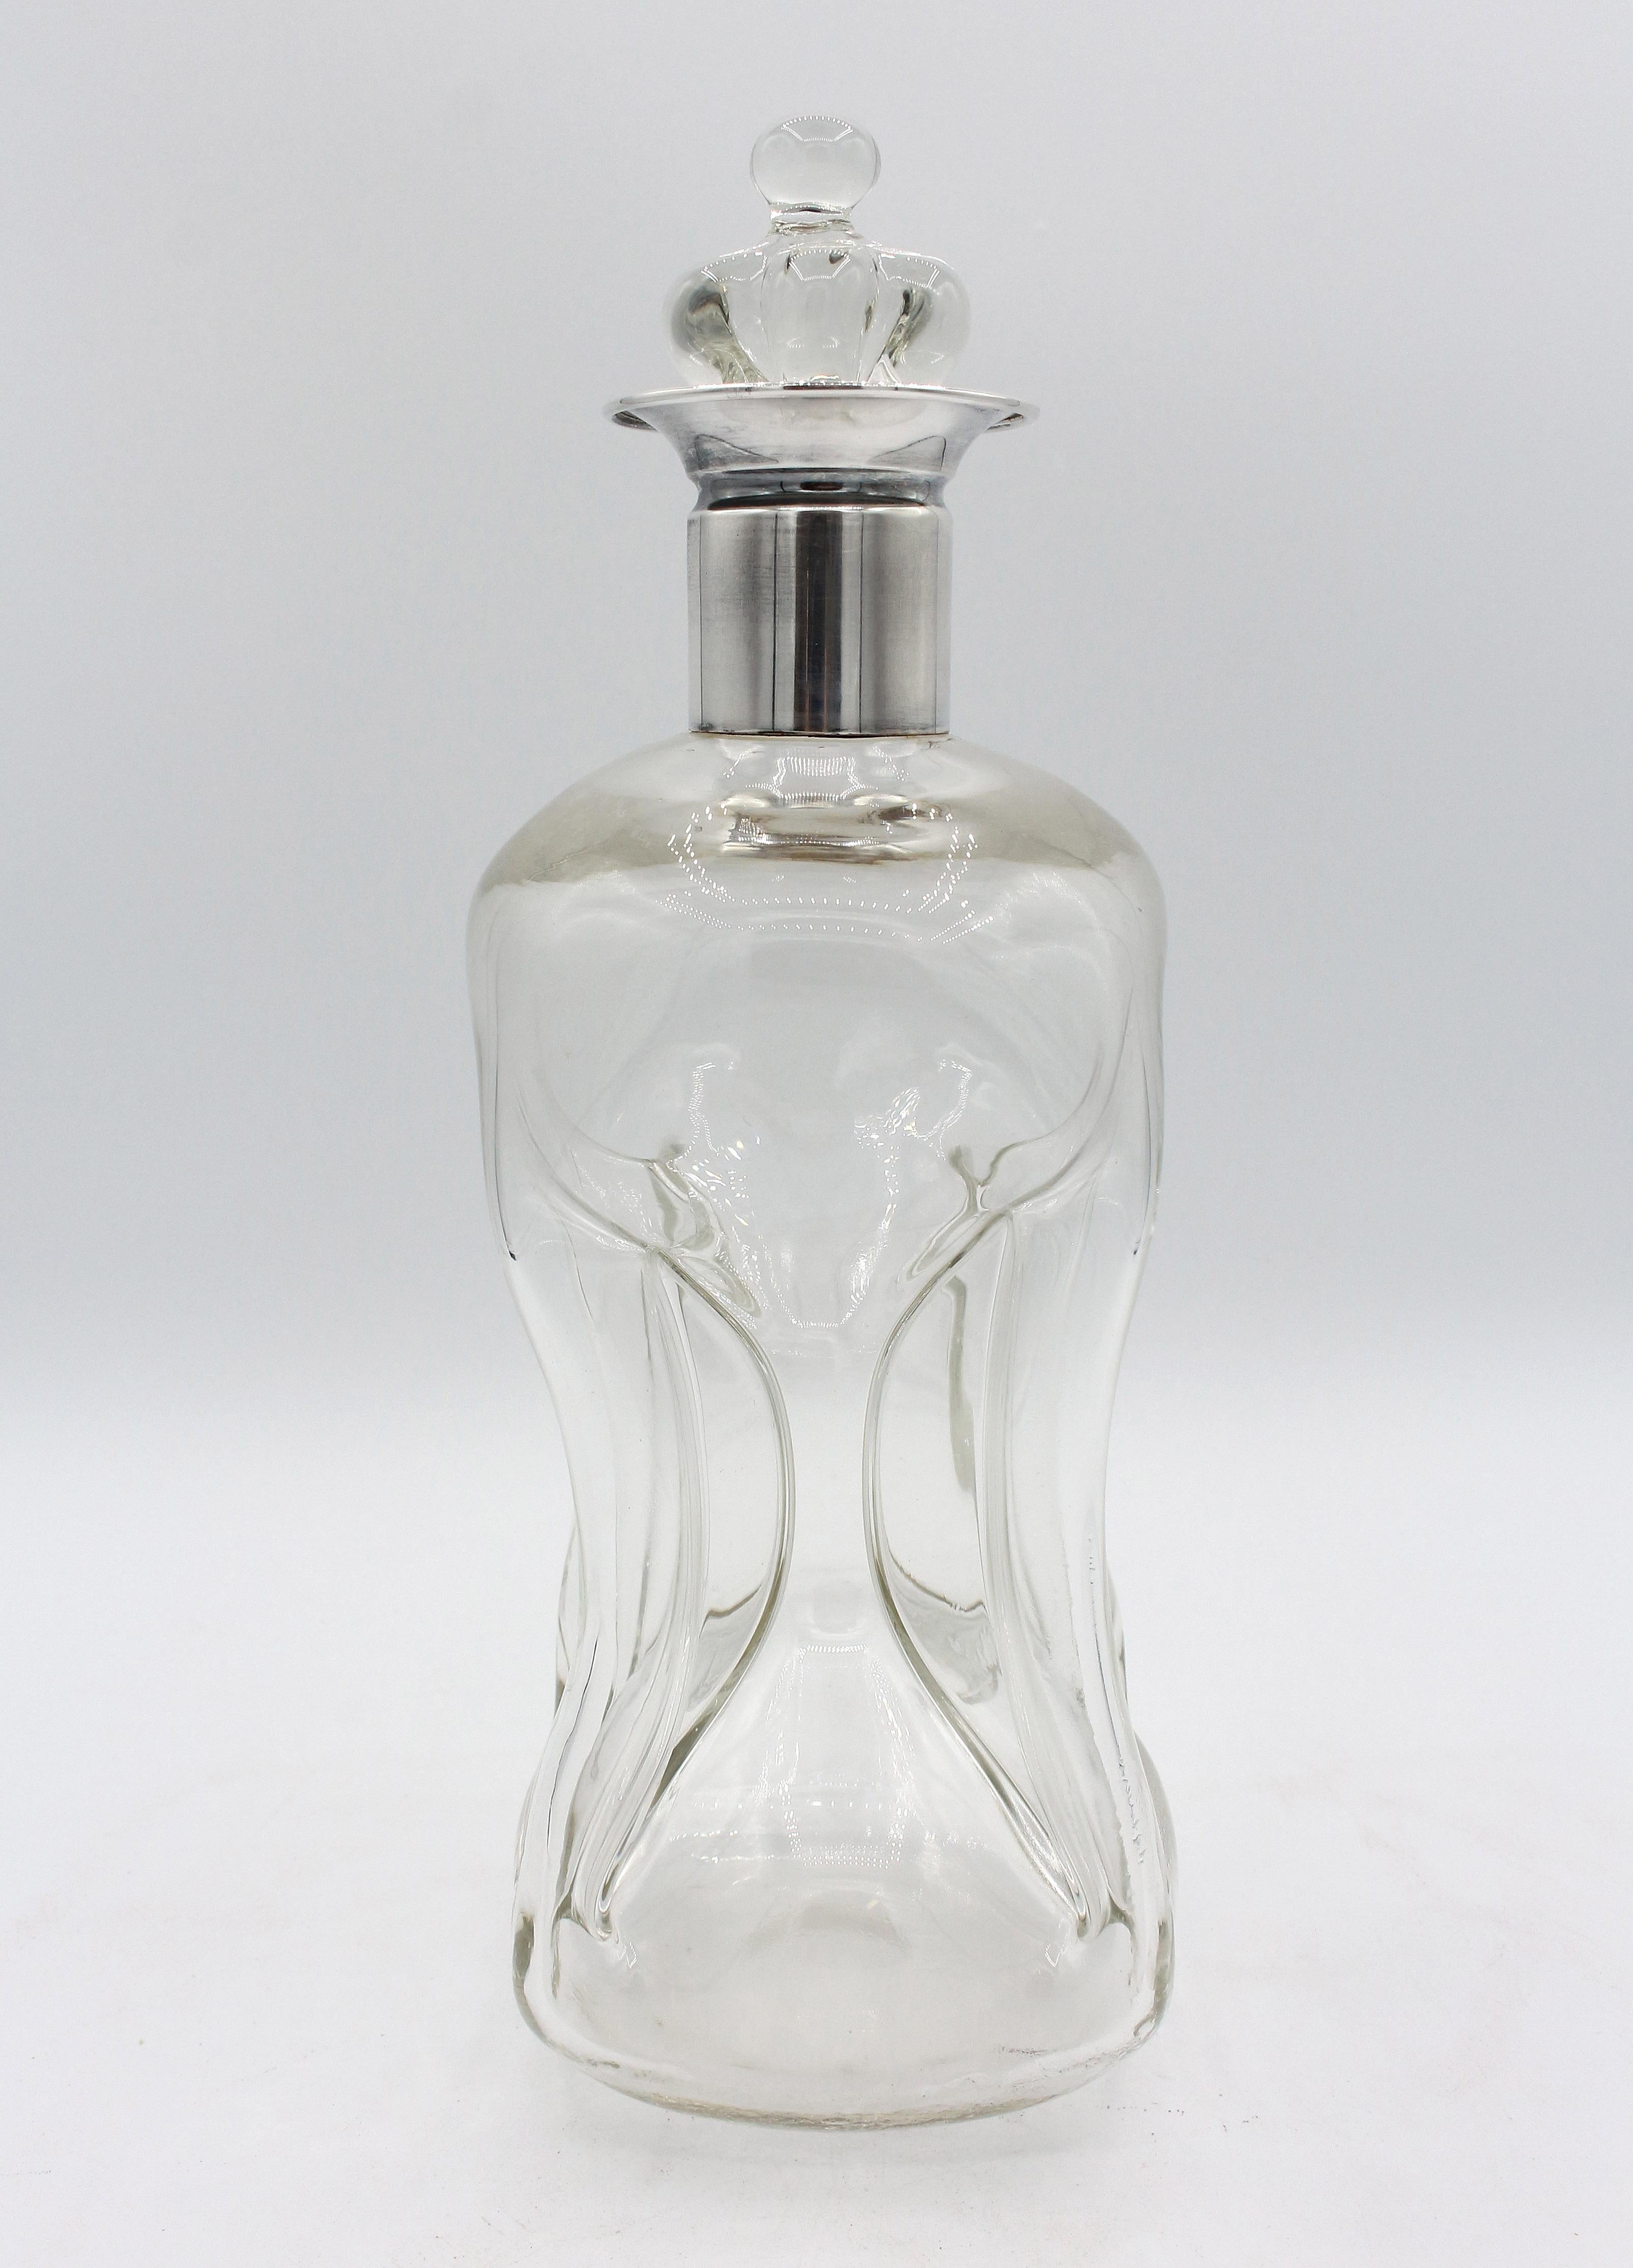 1951 Danish blown glass & silver Kluk Kluk decanter. Original crown stopper. Made by E. Dragsted, silver collar with his hallmark. The name comes from the pouring sound due to the pinched sections form. Chip inner edge of decanter. Slight residue